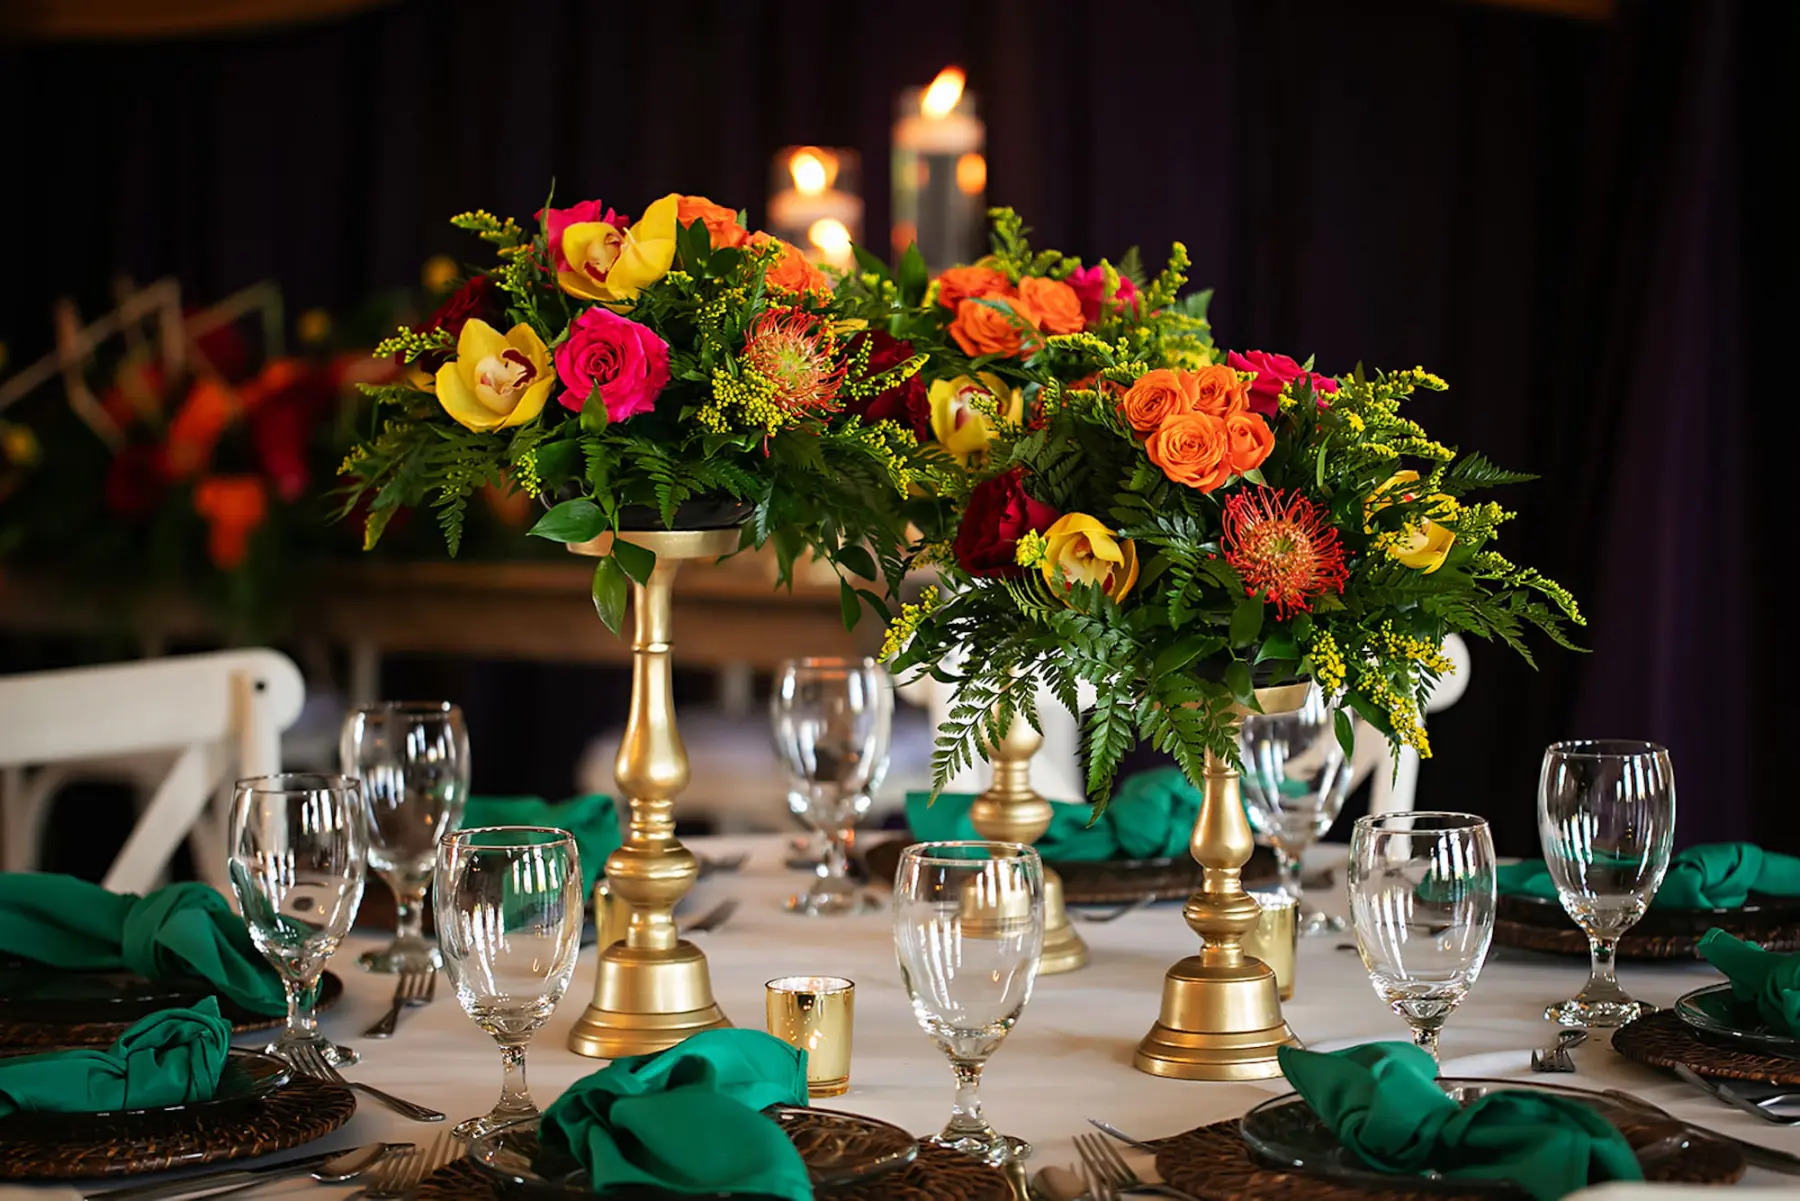 Colorful Tropical Wedding Reception Centerpiece Inspiration | Orange Pincushion Protea, Pink and Red Roses, Ferns and Greenery Floral Arrangement Ideas